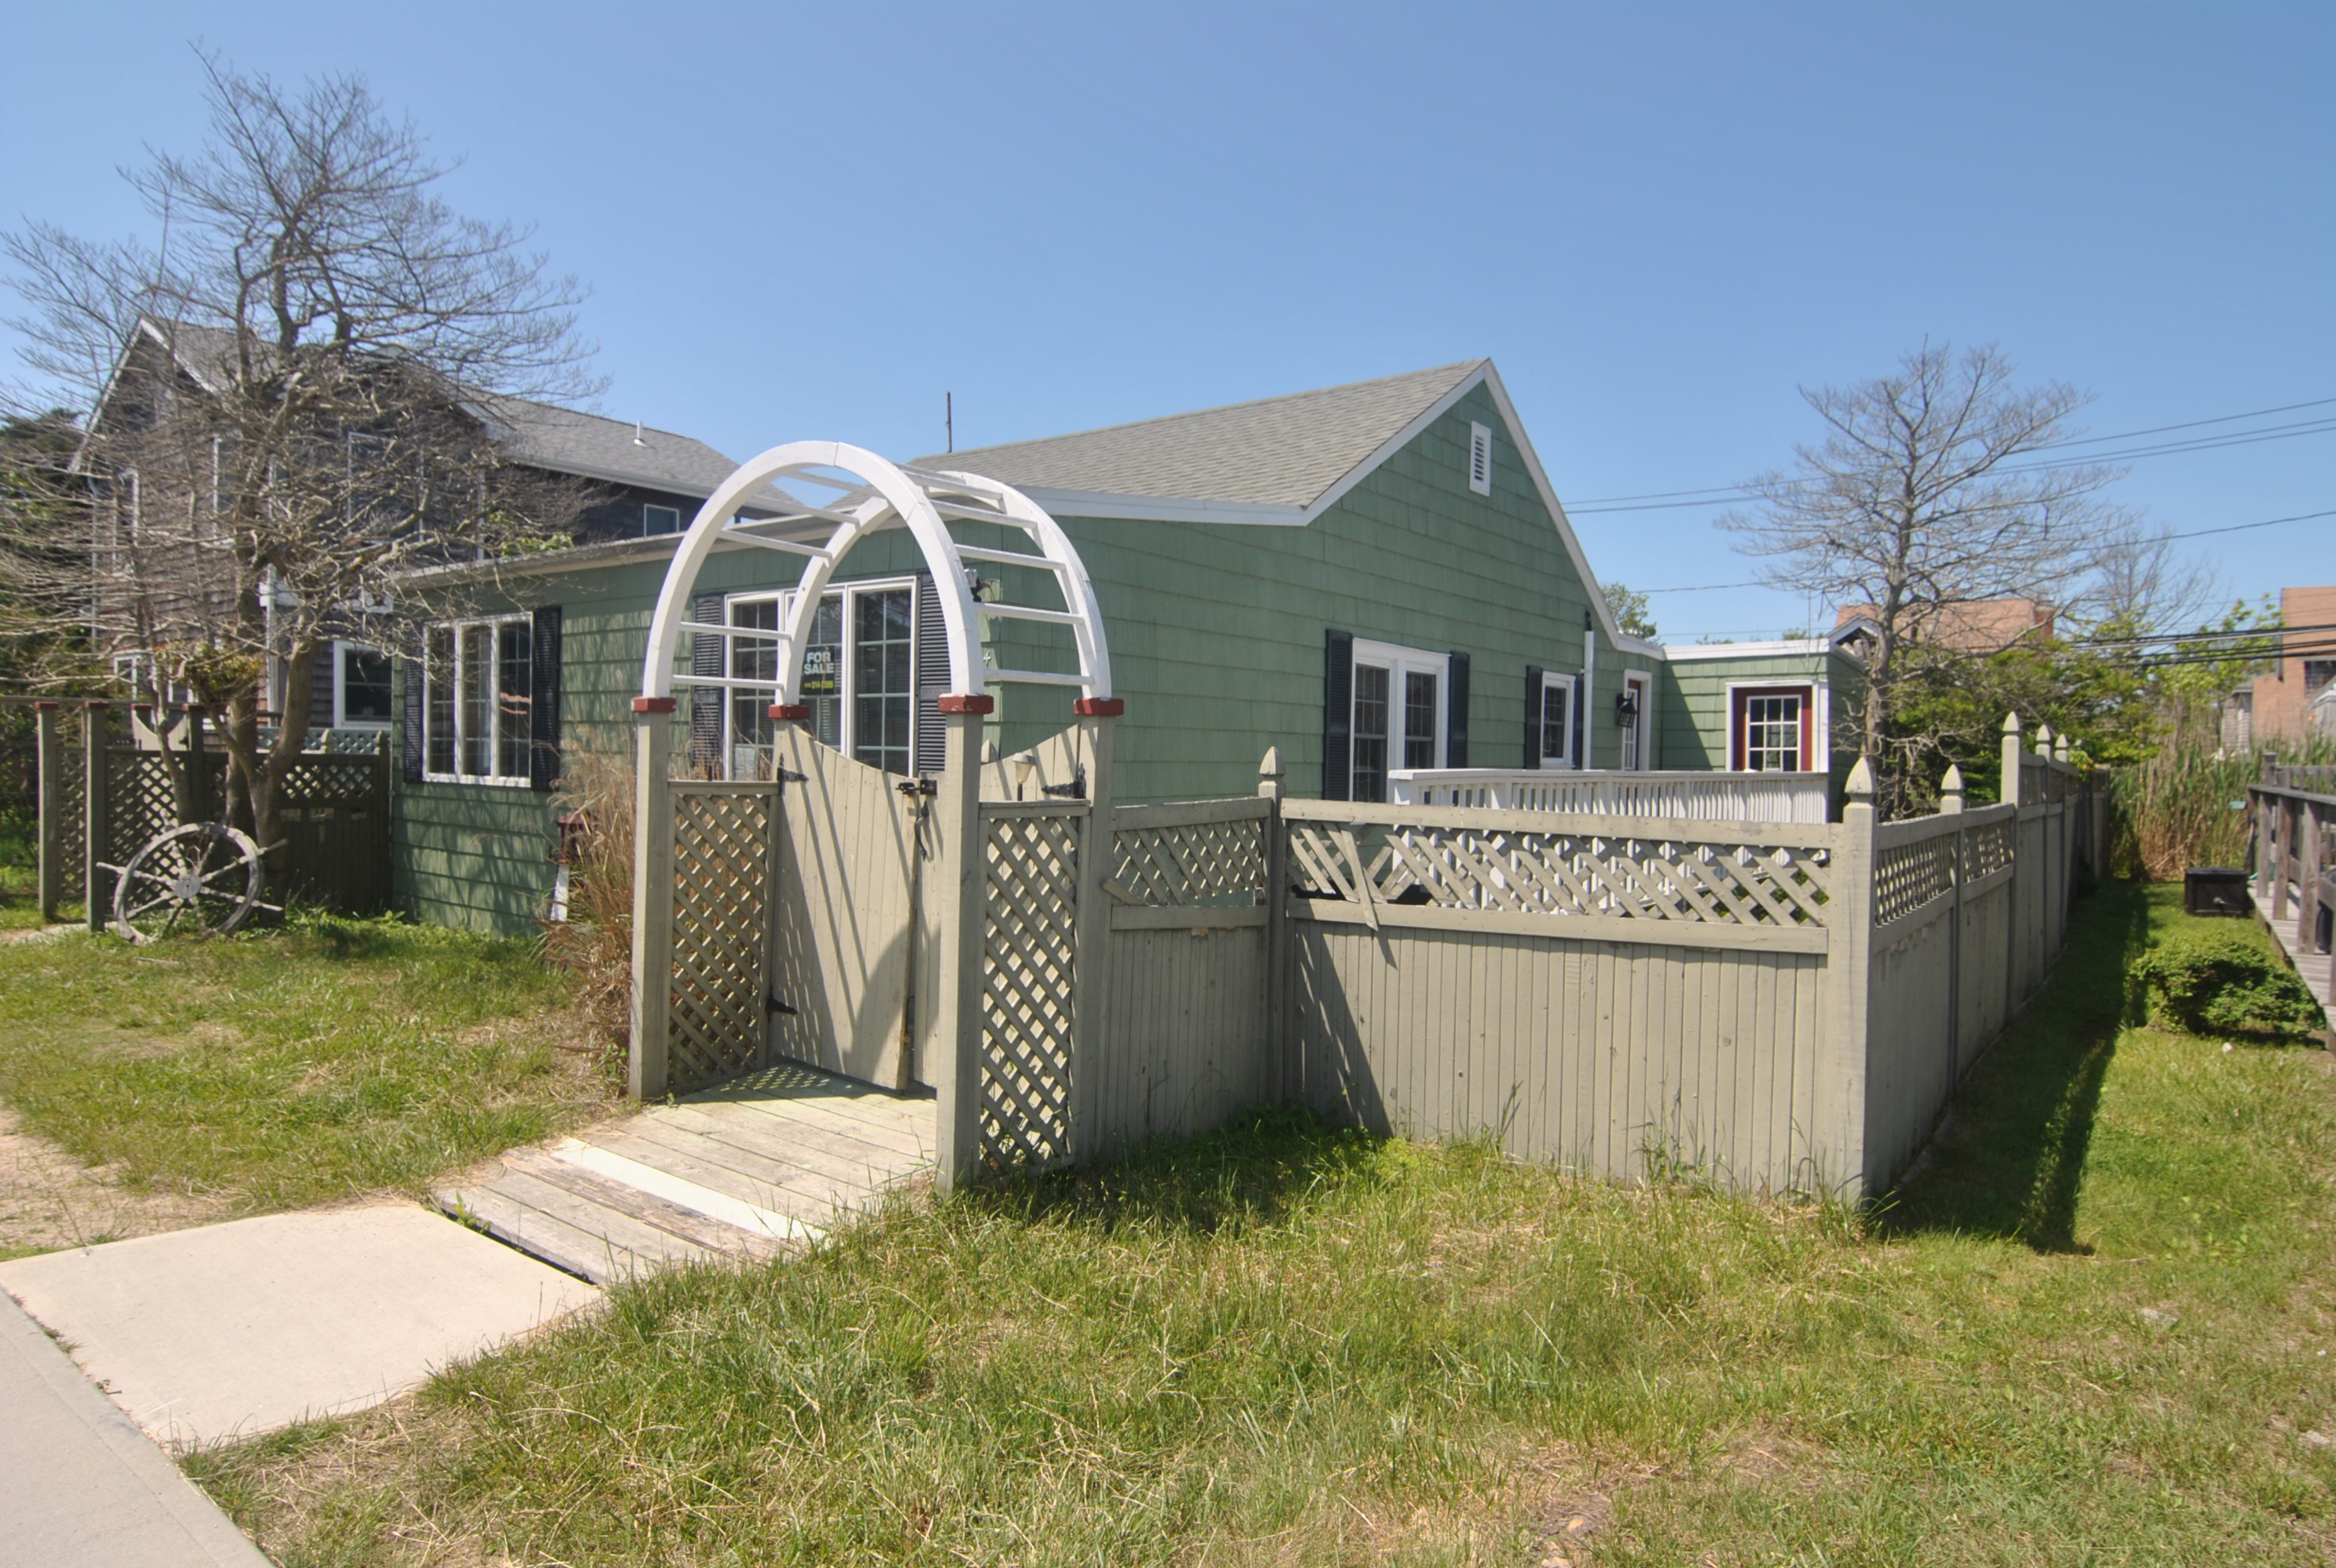 This charming home is all updated. 4 bedrooms and 1.5 baths.  Open living and dining area. Sunny rear deck with outdoor shower and hot tub.  Quiet and convenient Ocean Beach location. Central air conditioning.  Great summer home or rental investment.  Seller financing available.